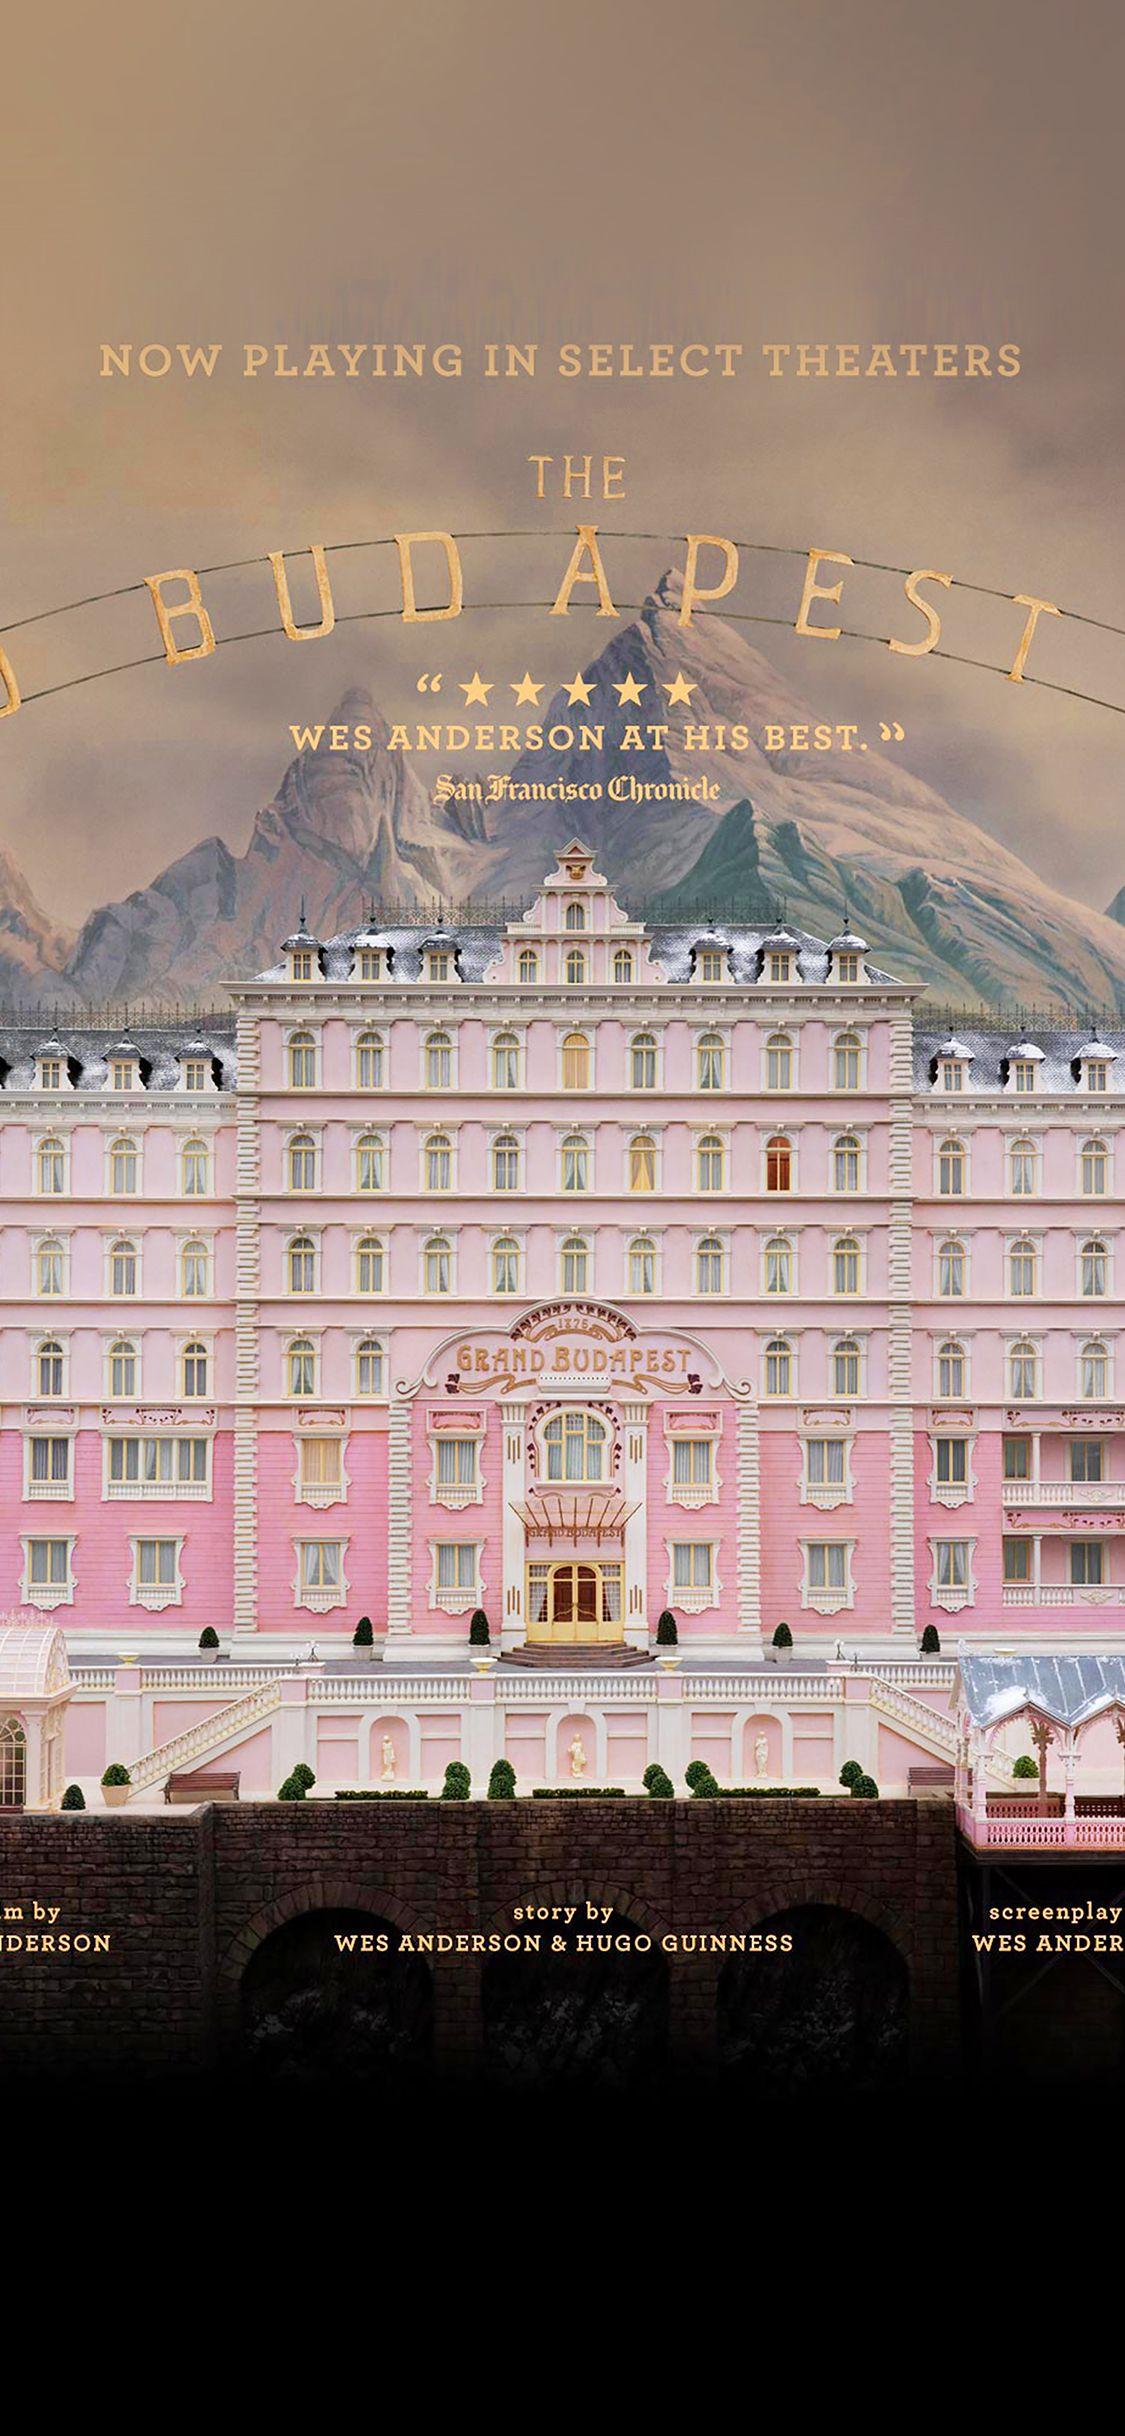 iPhonePapers grand budapest hotel film poster